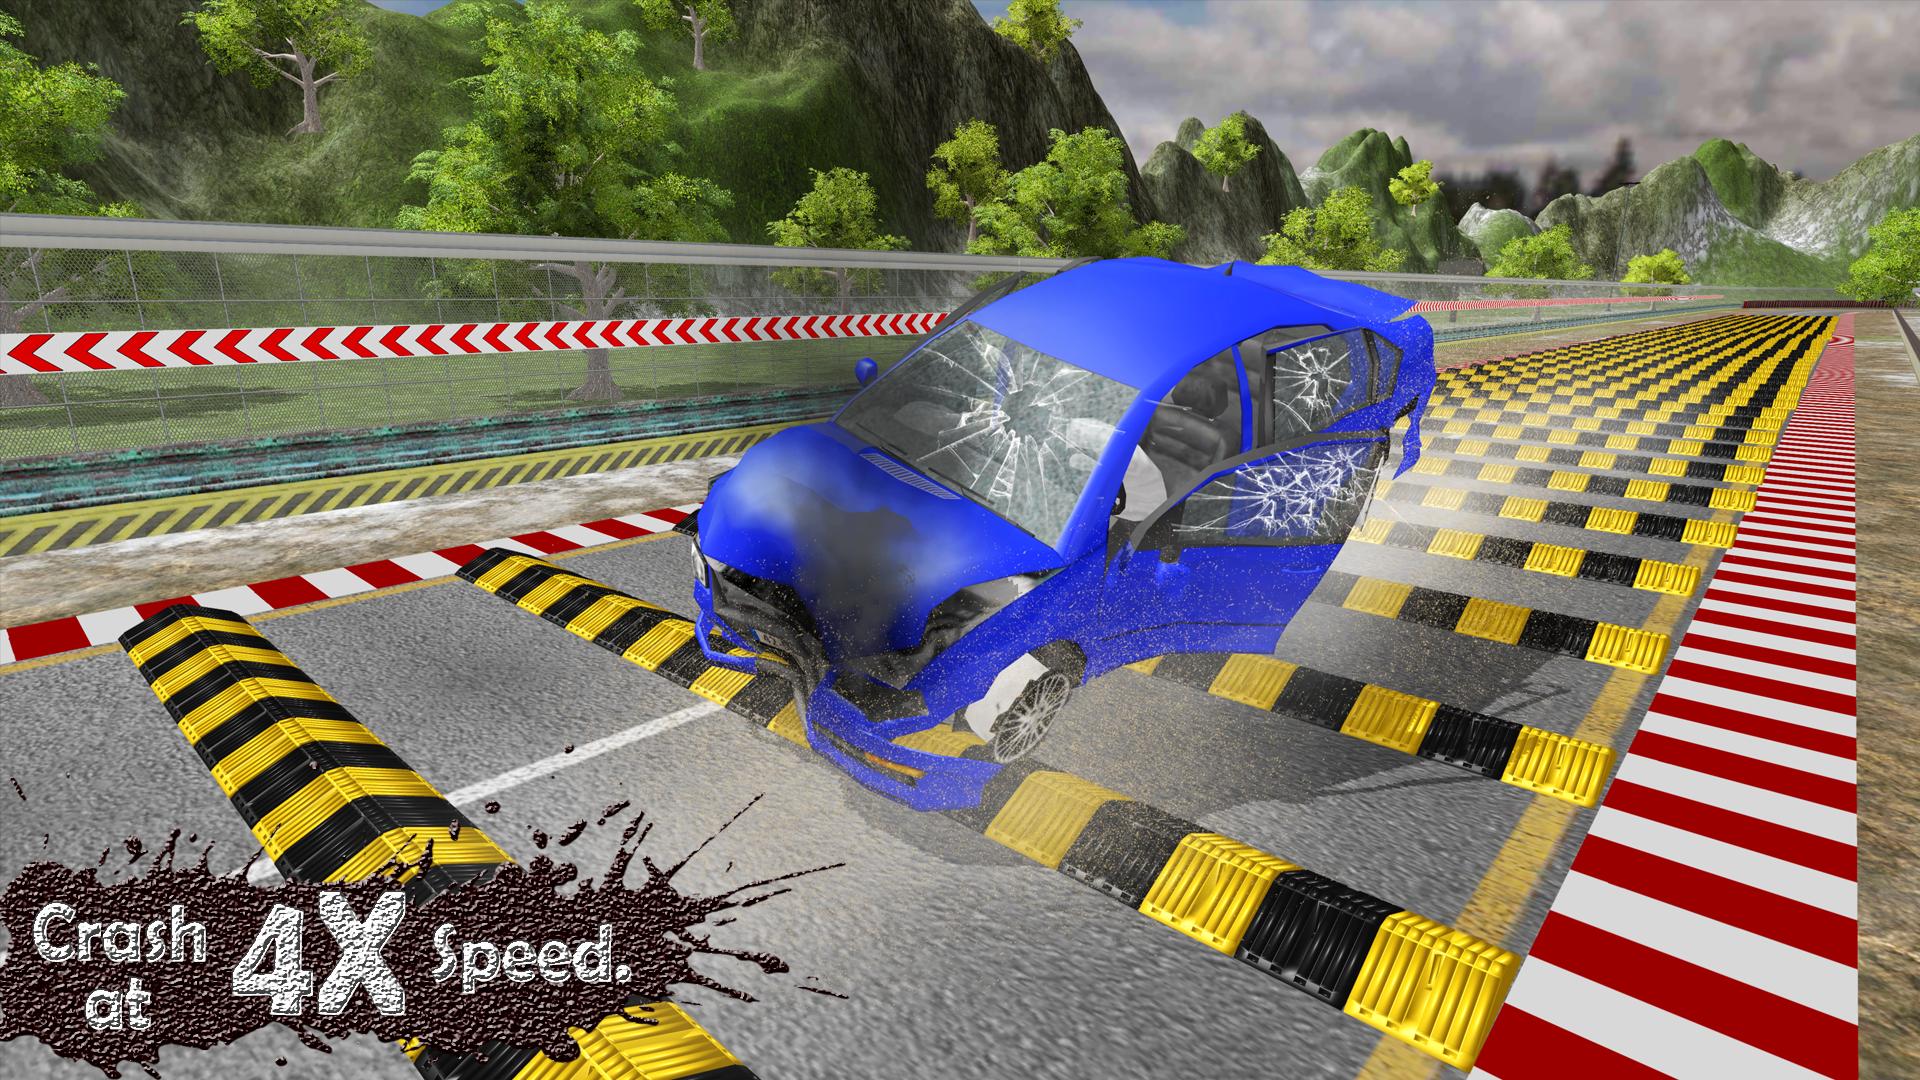 Can crash game. Кар краш симулятор 2. Кар краш симулятор акидент. Car crash Simulator 3. Симулятор автокатастроф.